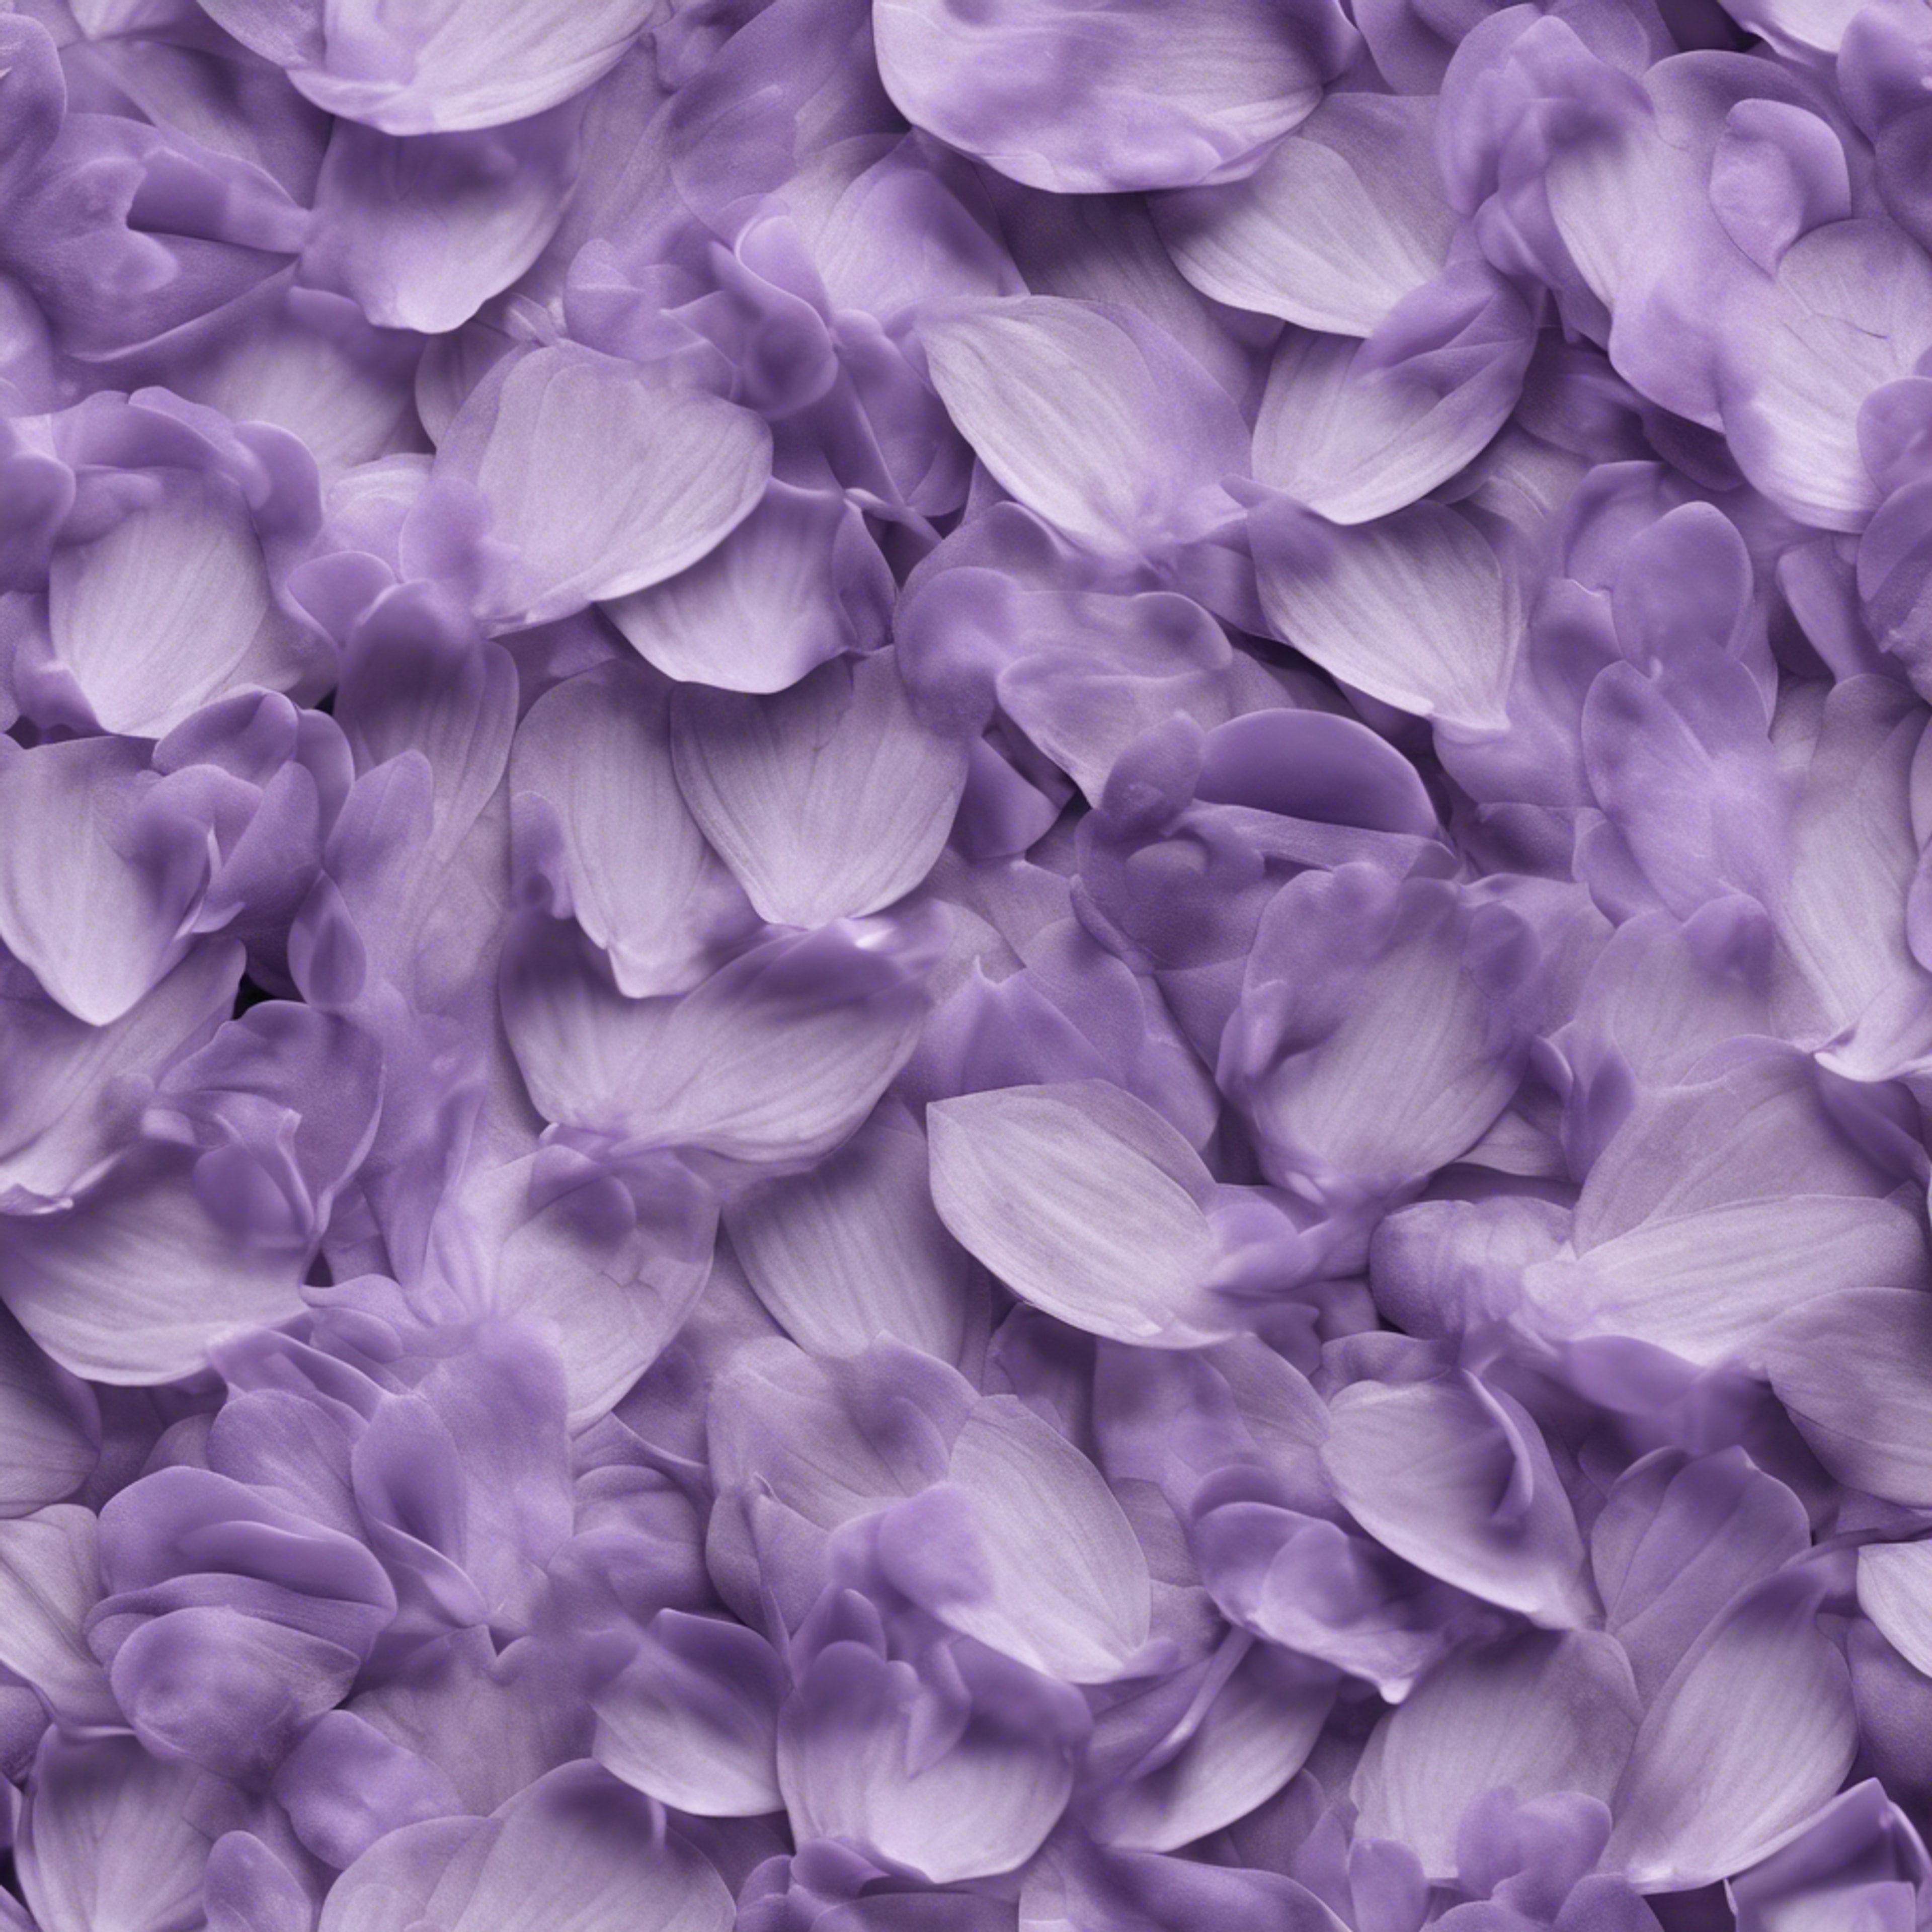 Seamless delicate pattern of layered lavender petals Ταπετσαρία[df581ced6ed94056816b]